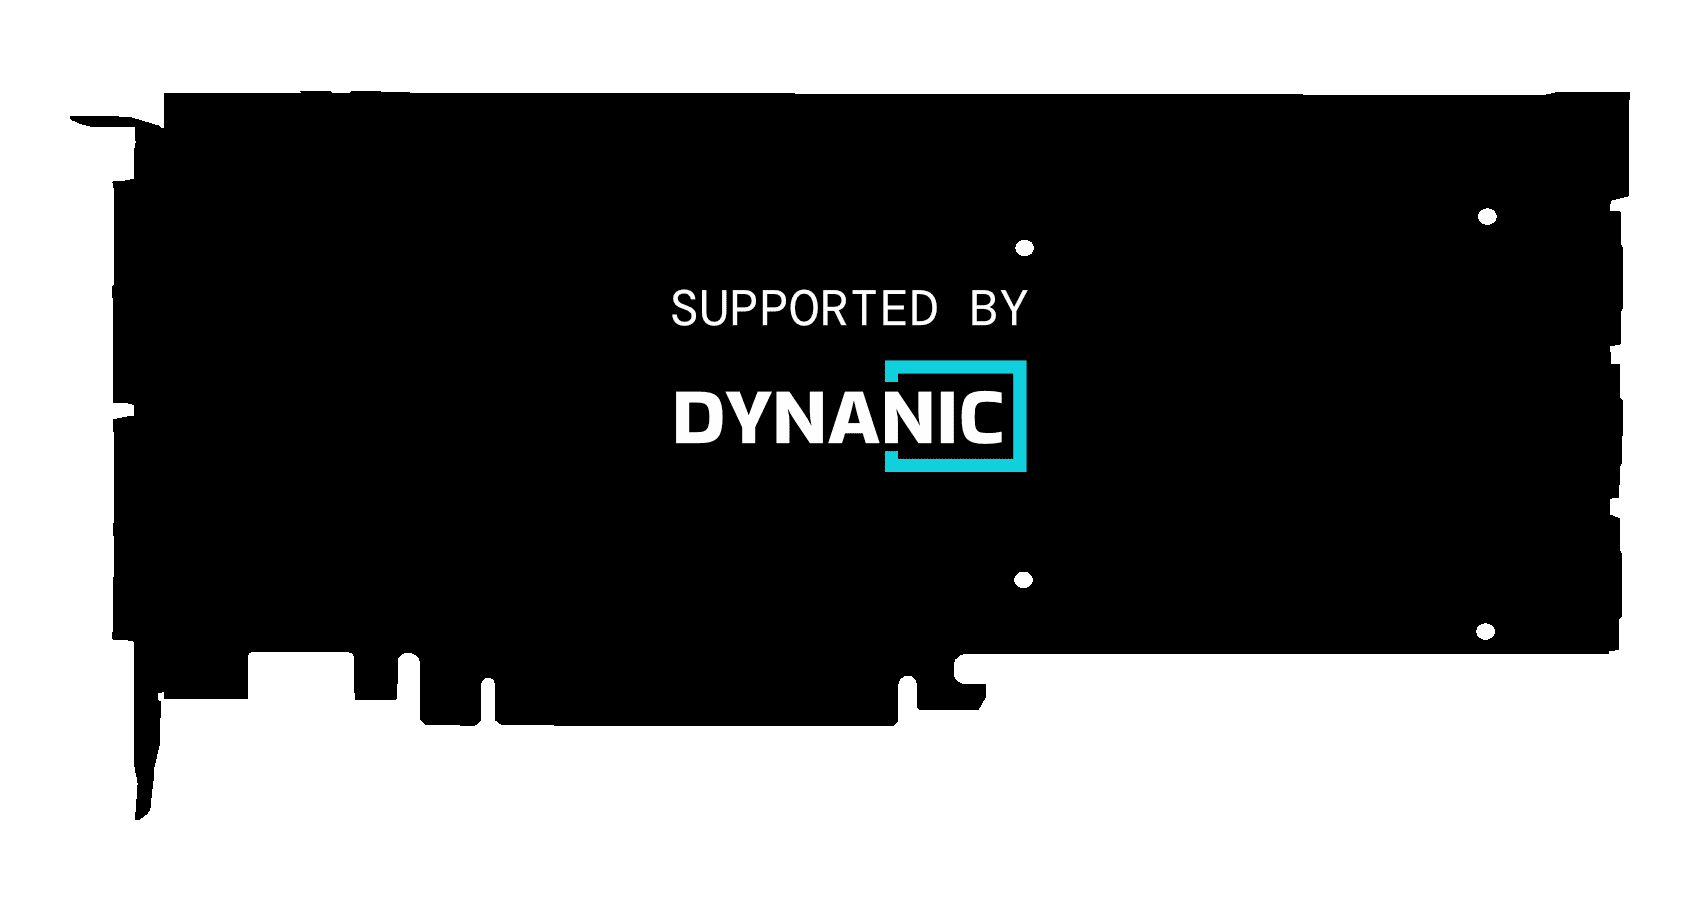 DYNANIC - supported card